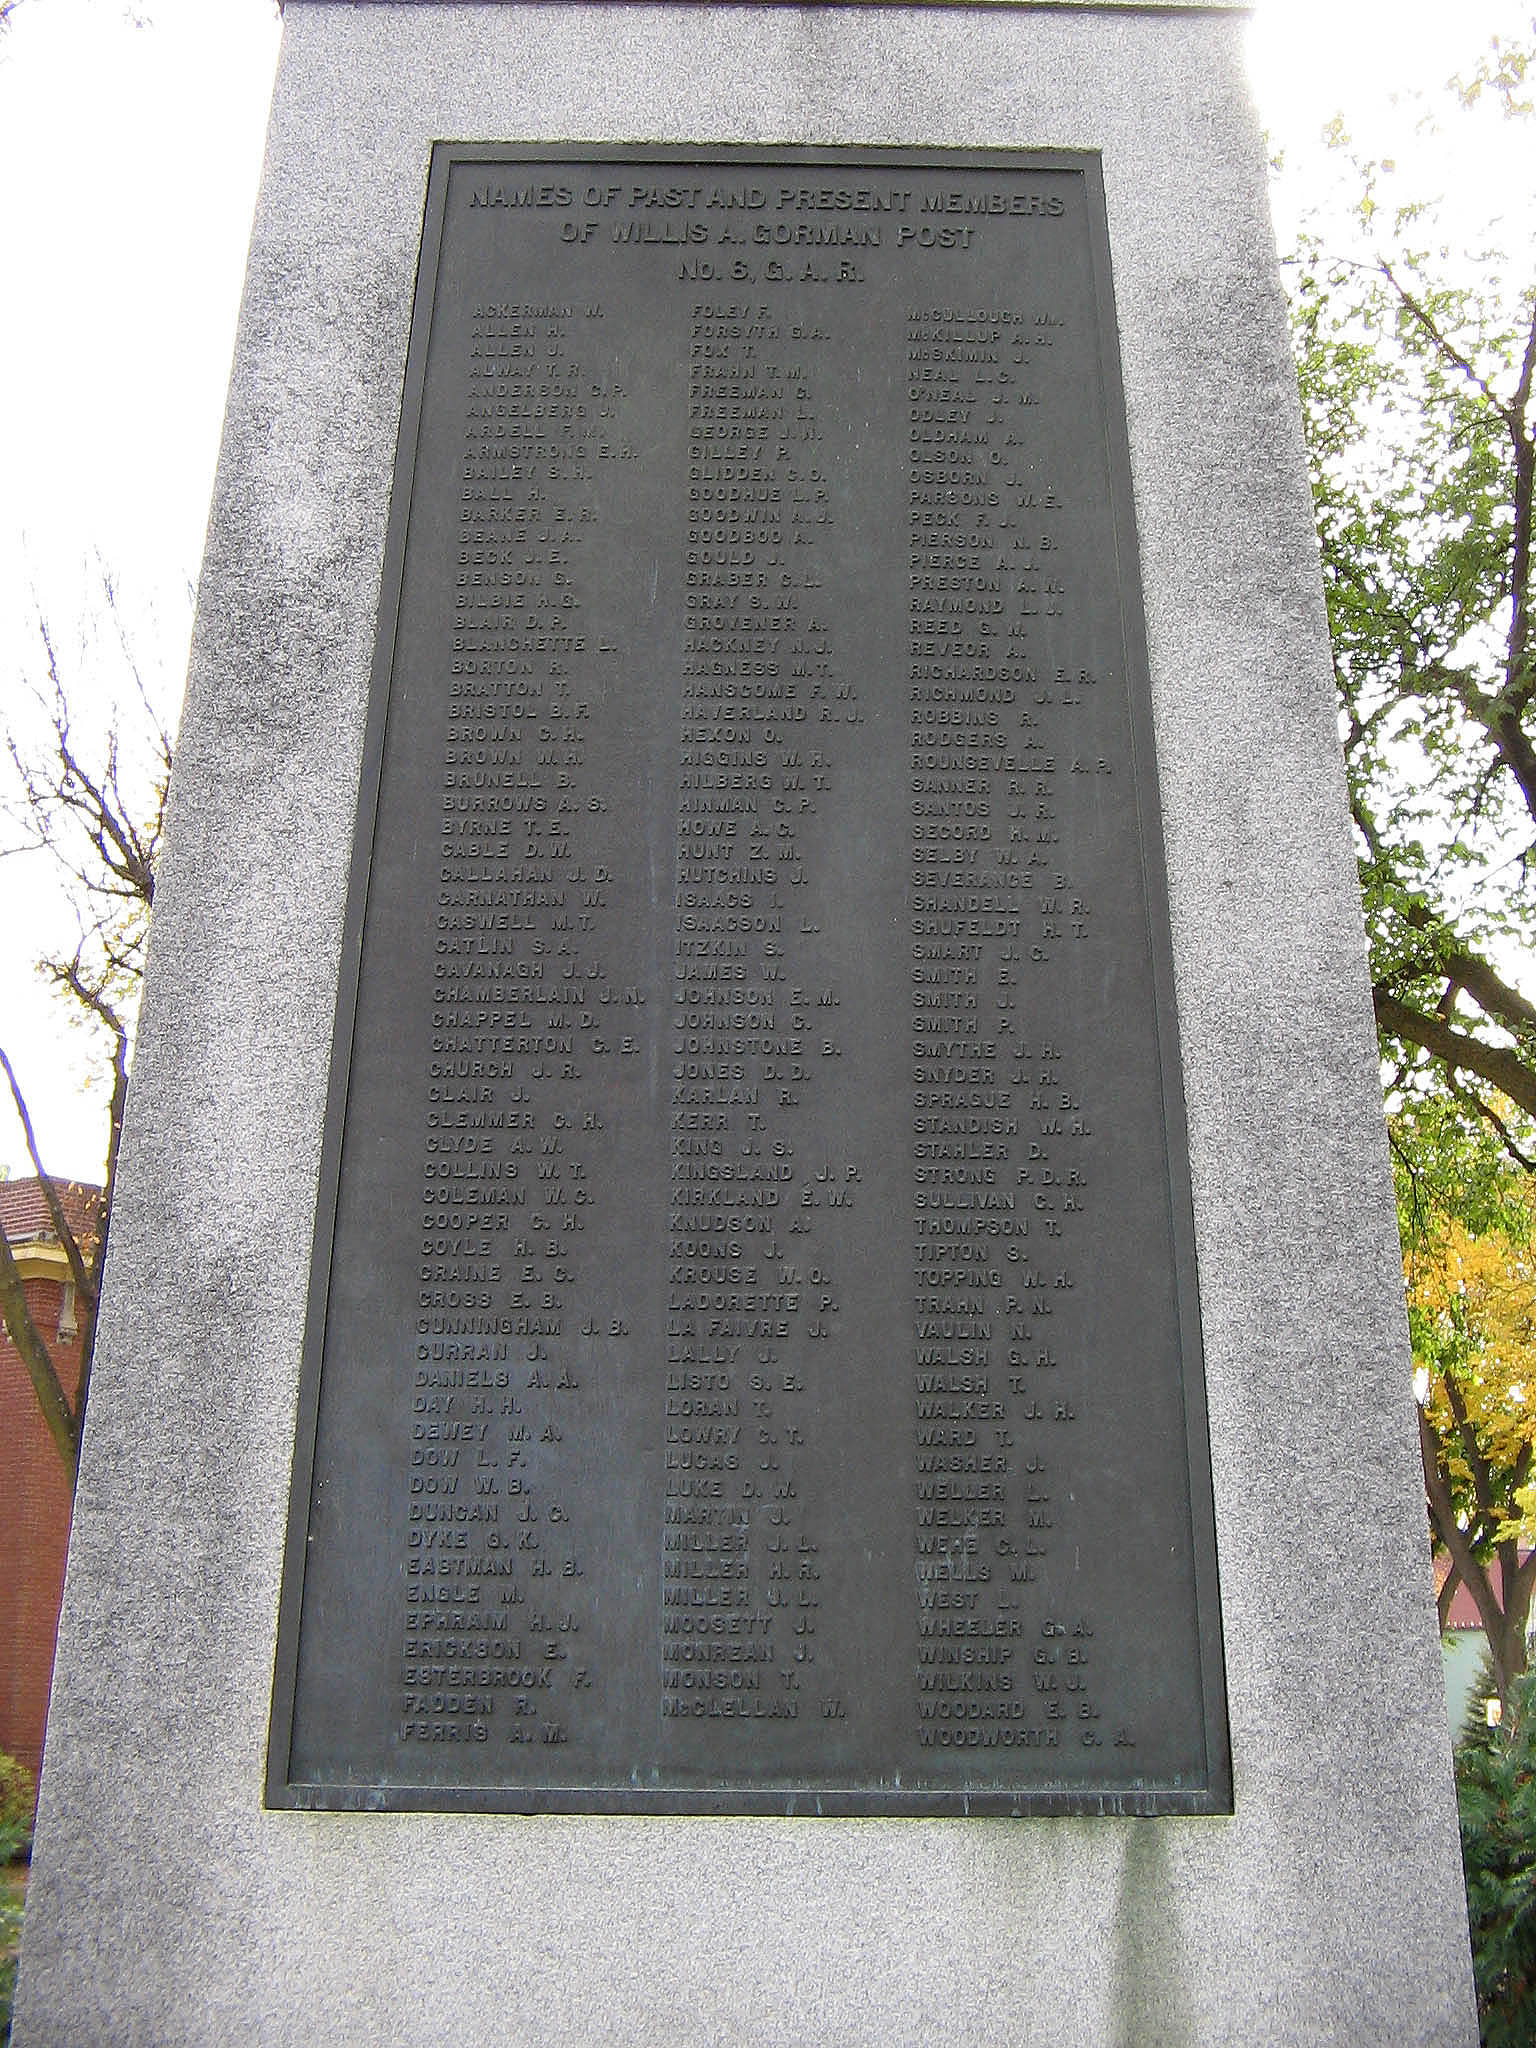 Plaque with names of members of the local GAR camp when monument was dedicated 